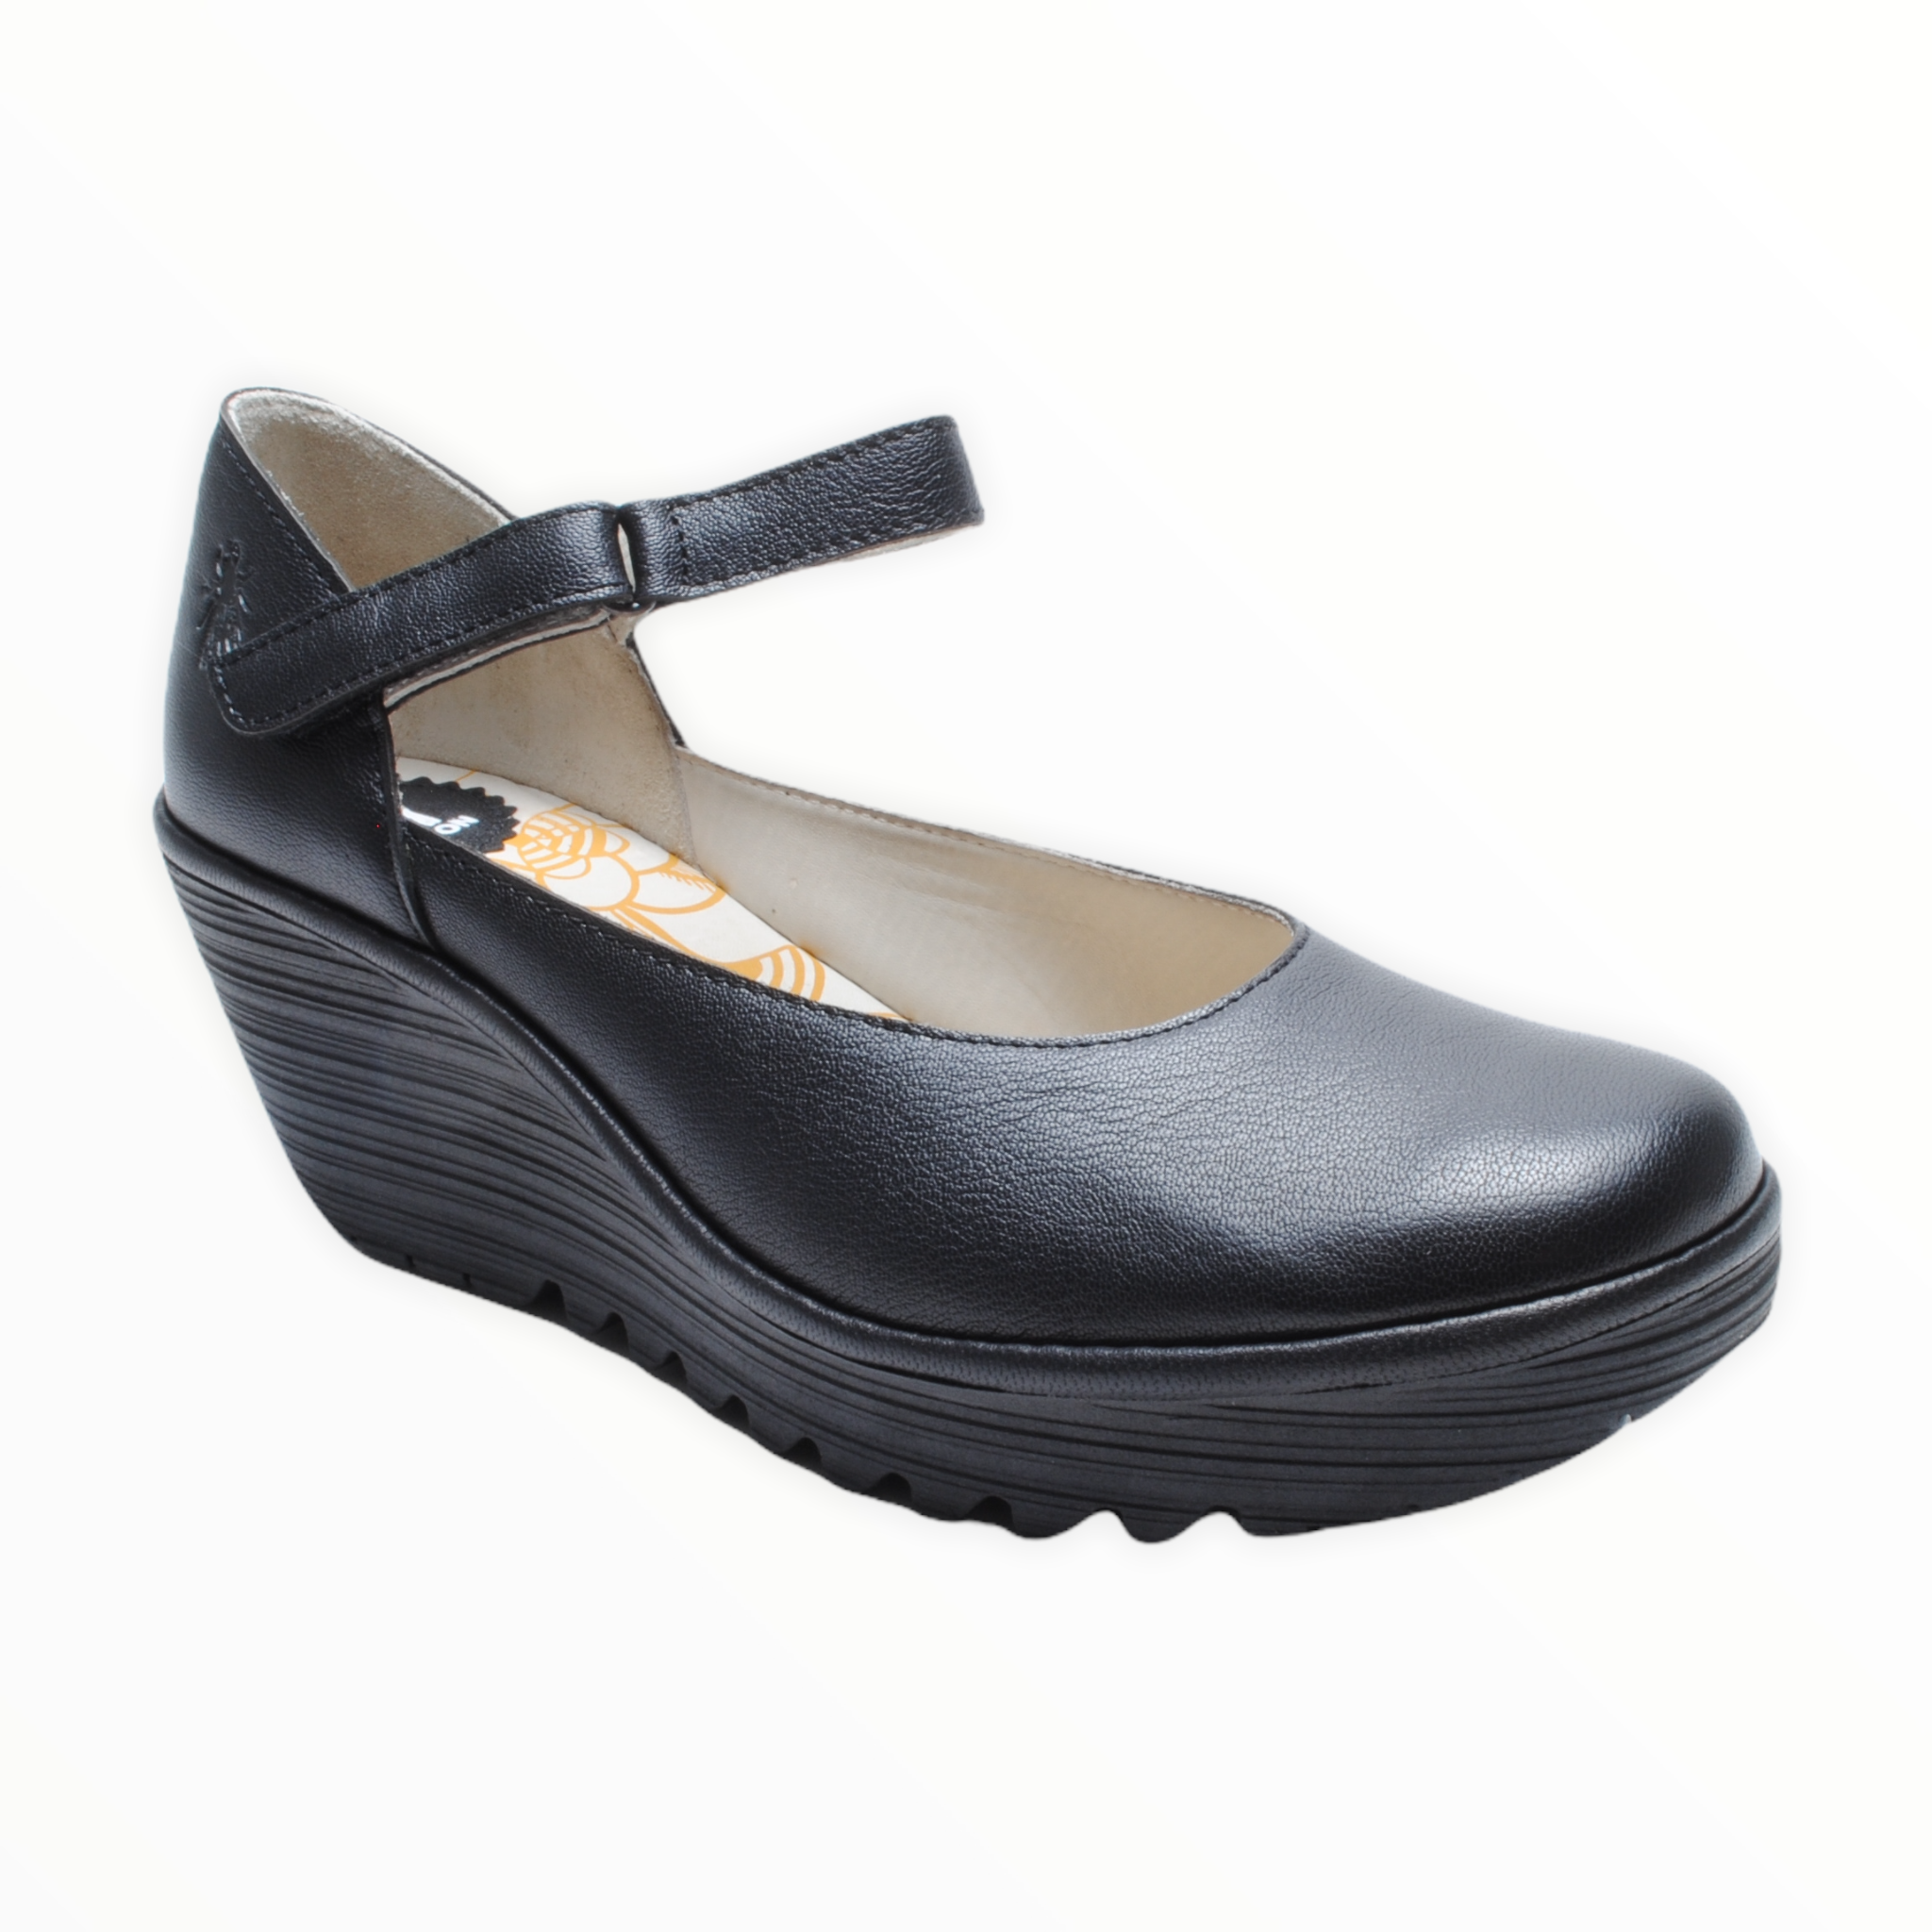 Fly London Yoni Women's Black Patent Shoes - Free Delivery at Shoes.co.uk